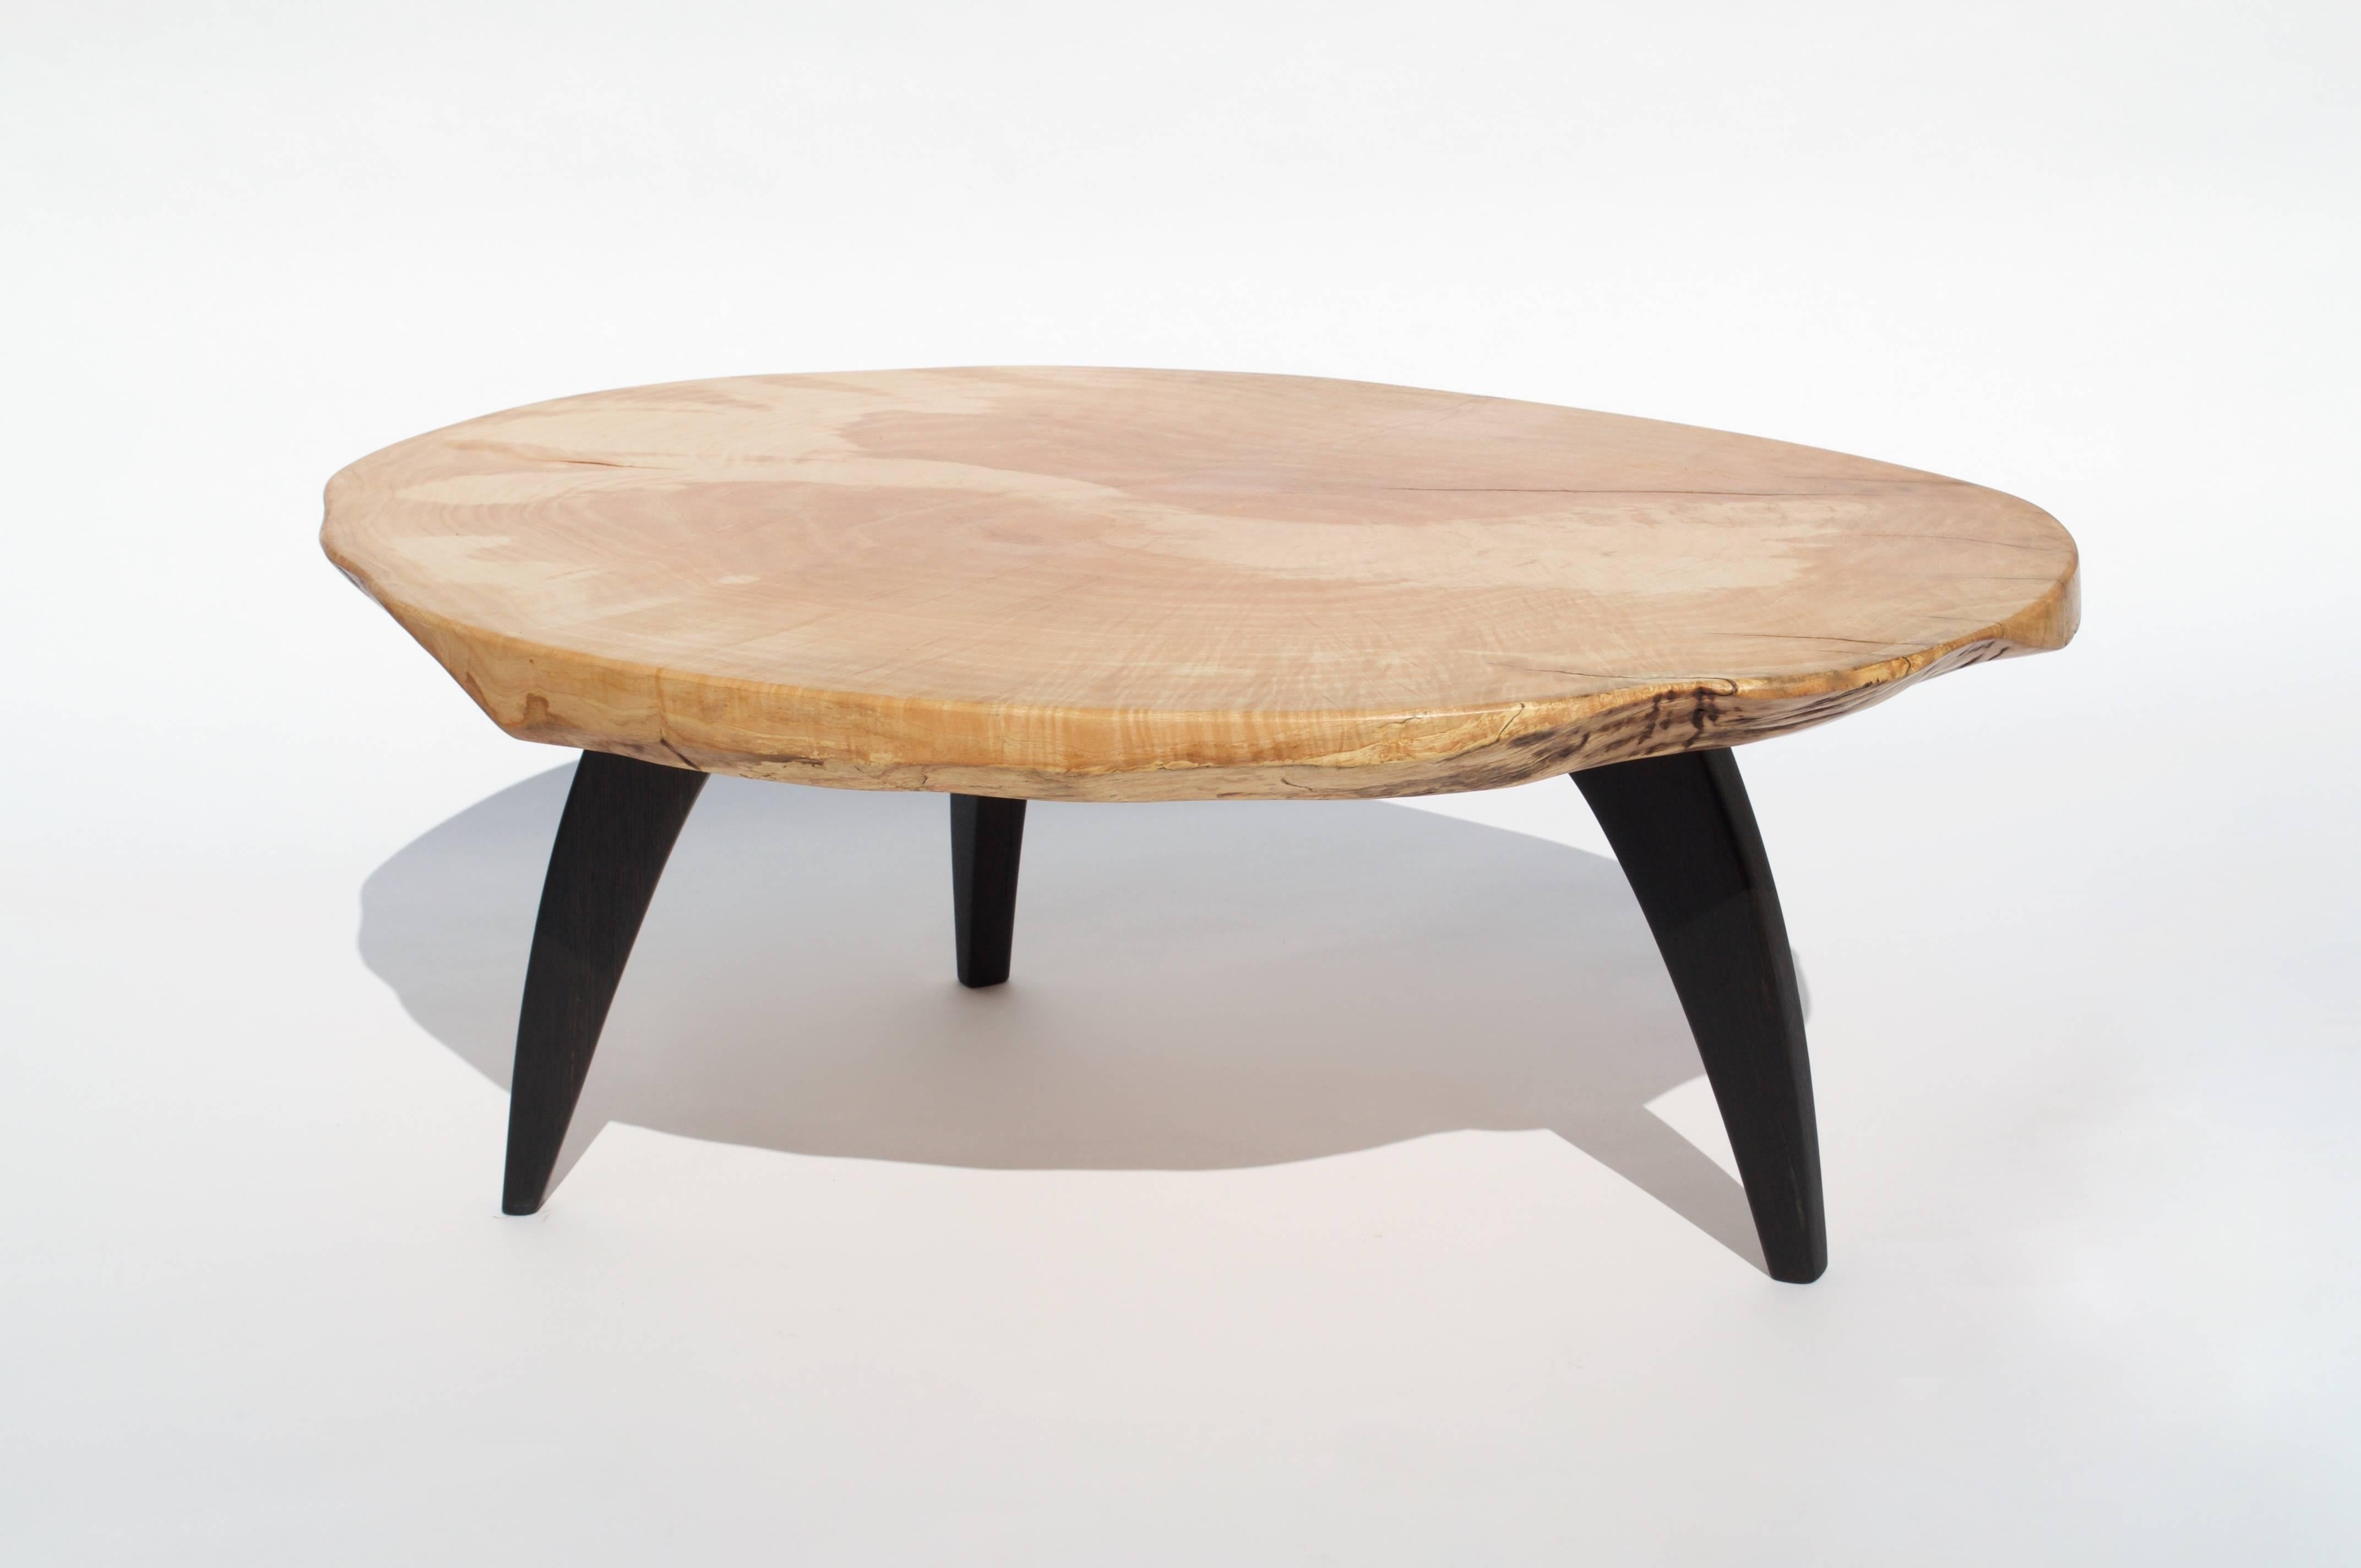 Unique signed table by Jörg Pietschmann
Table, elm, bog oak
Measures: H 38 x W 101 x D 73 cm
Side piece of an old oak with exceptional elm colorful legs. 

In Pietschmann’s sculptures, trees that for centuries were part of a landscape and